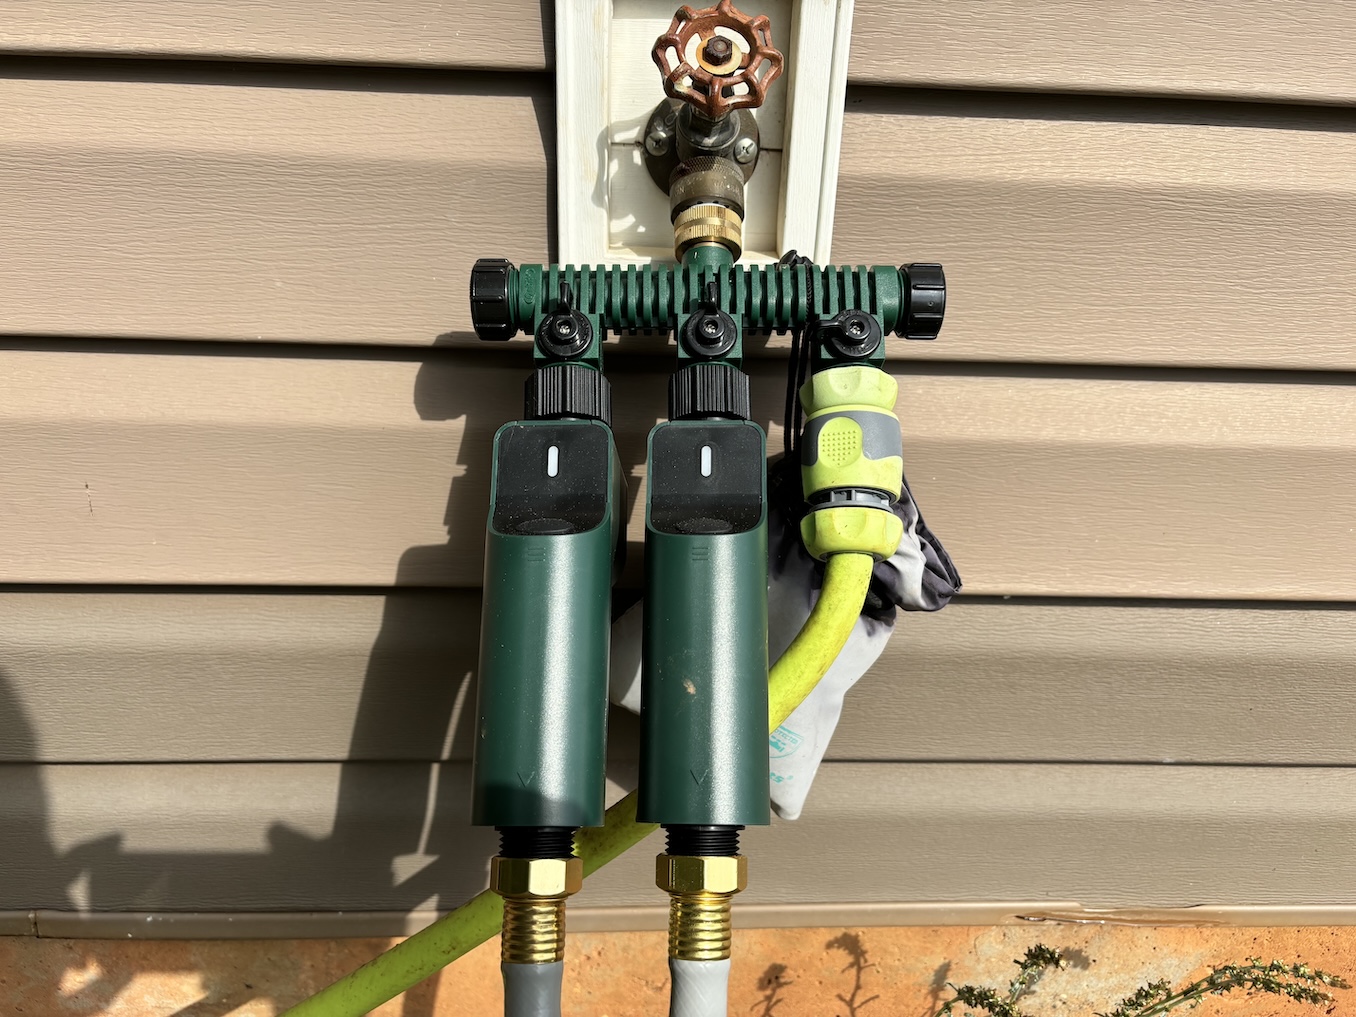 Sprinkler timers attached to a manifold